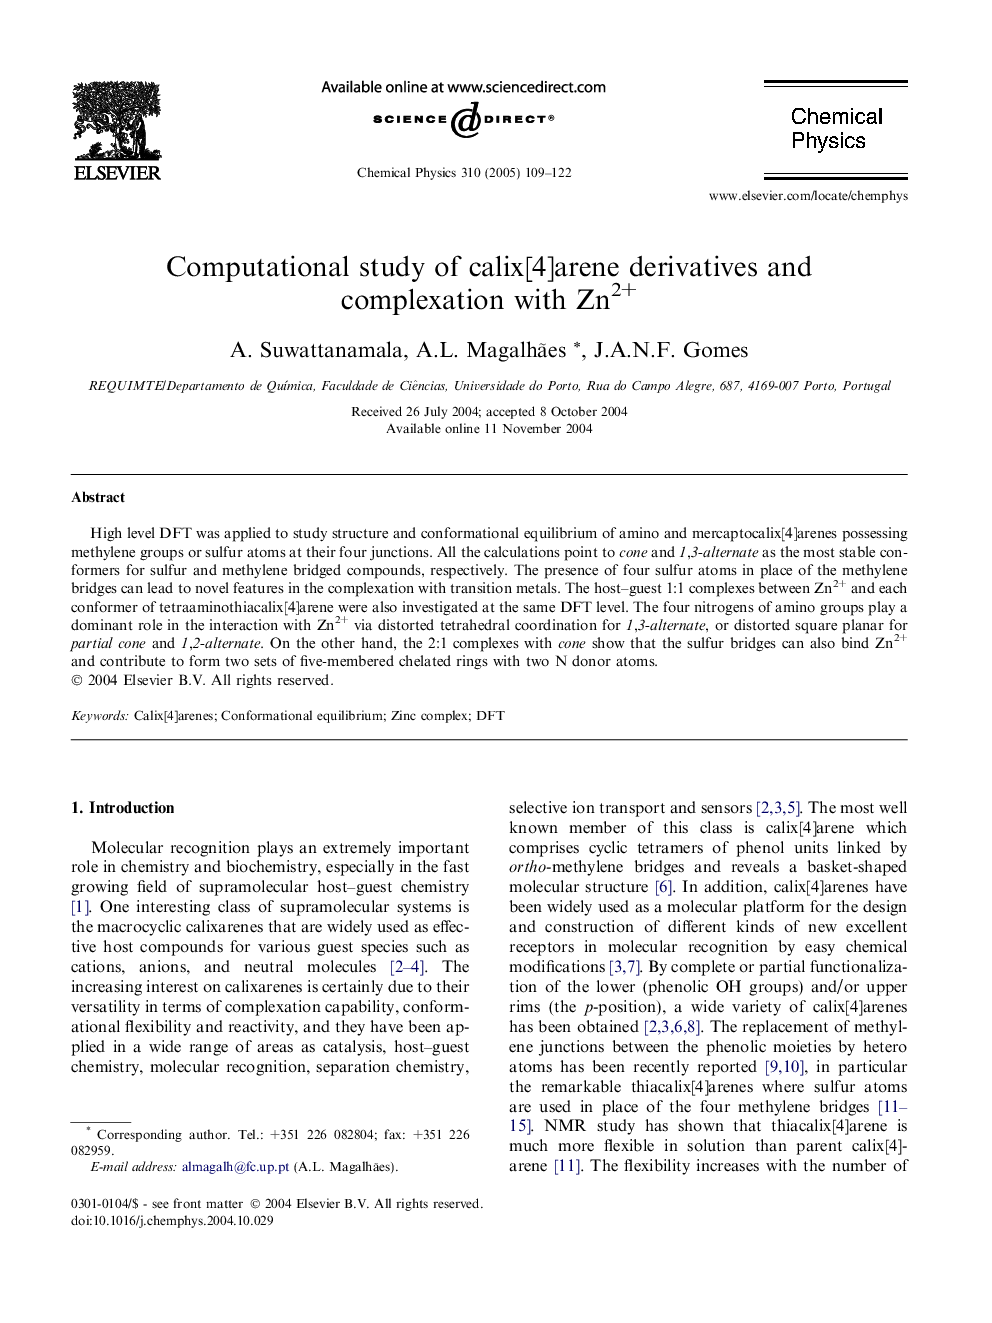 Computational study of calix[4]arene derivatives and complexation with Zn2+